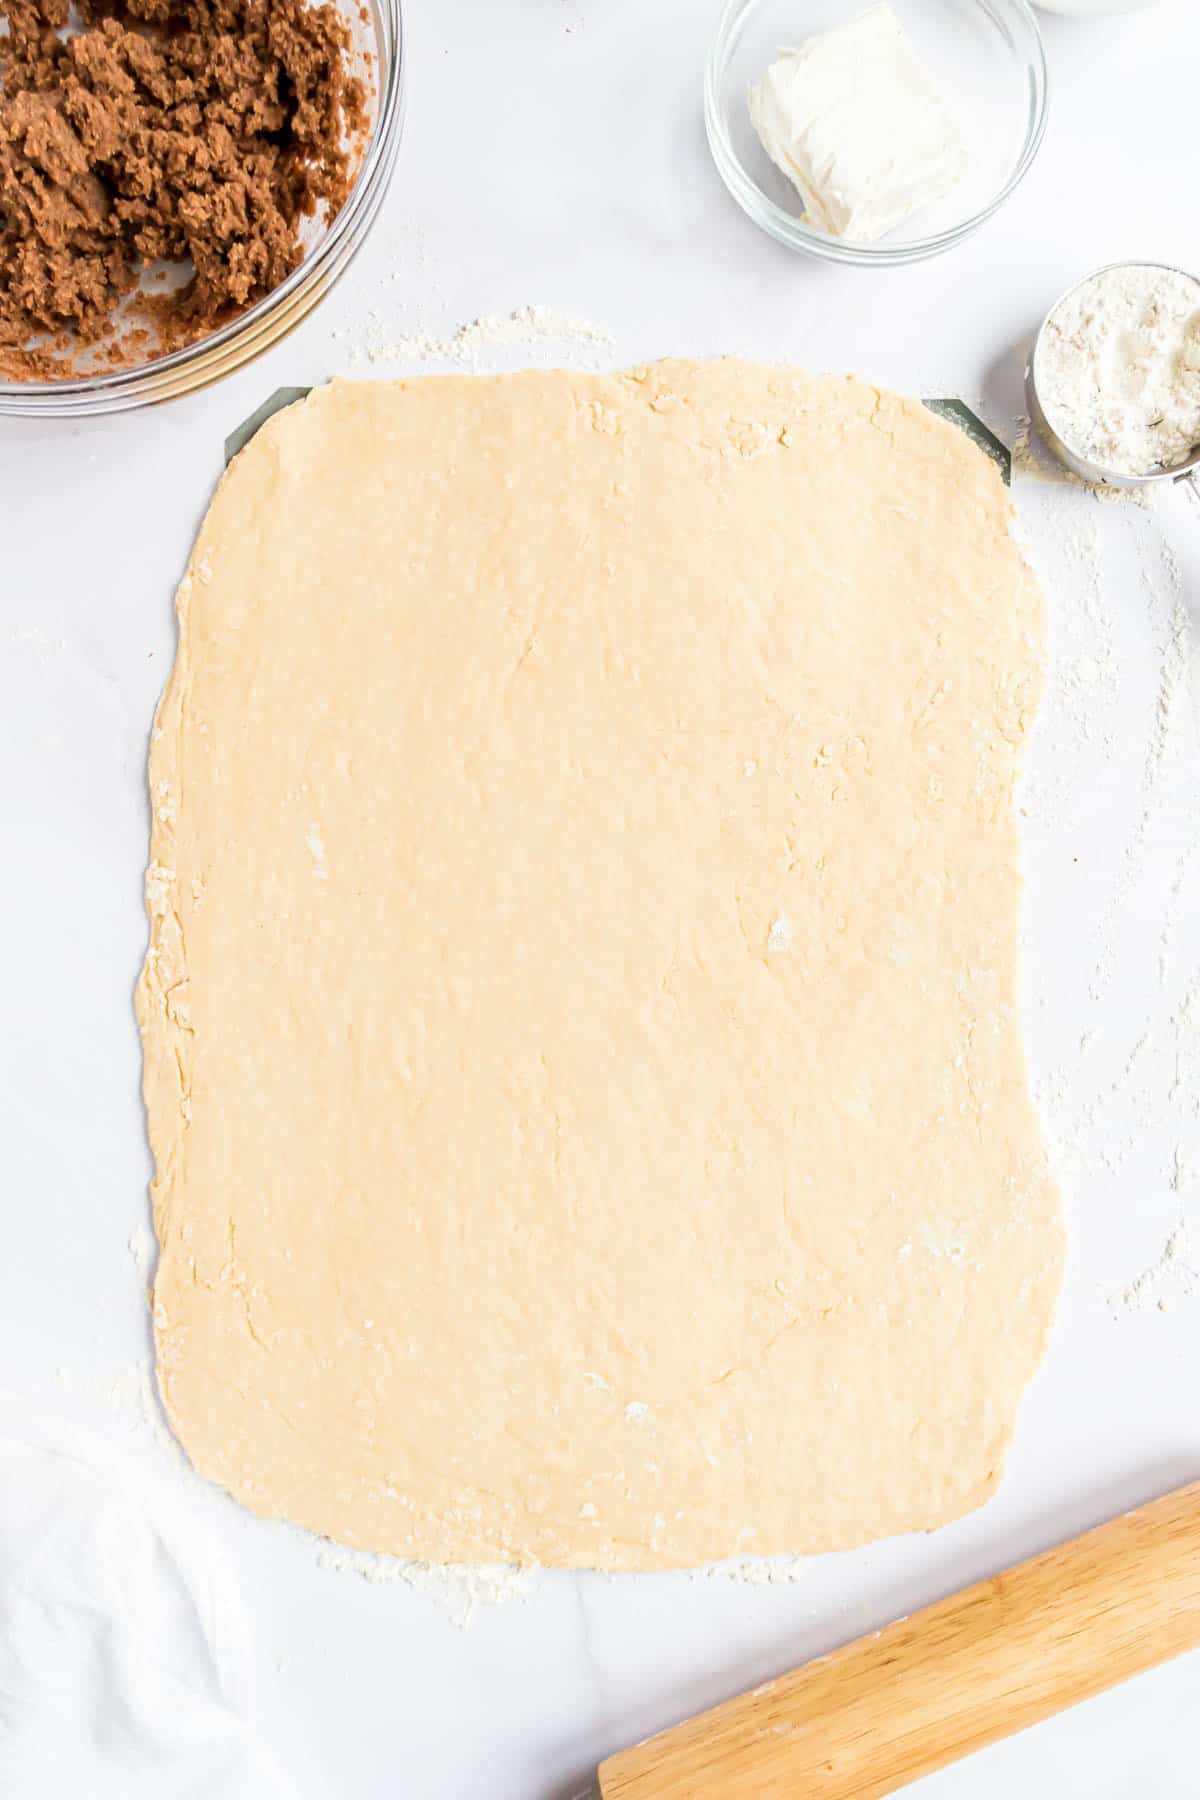 Dough rolled into rectangle.